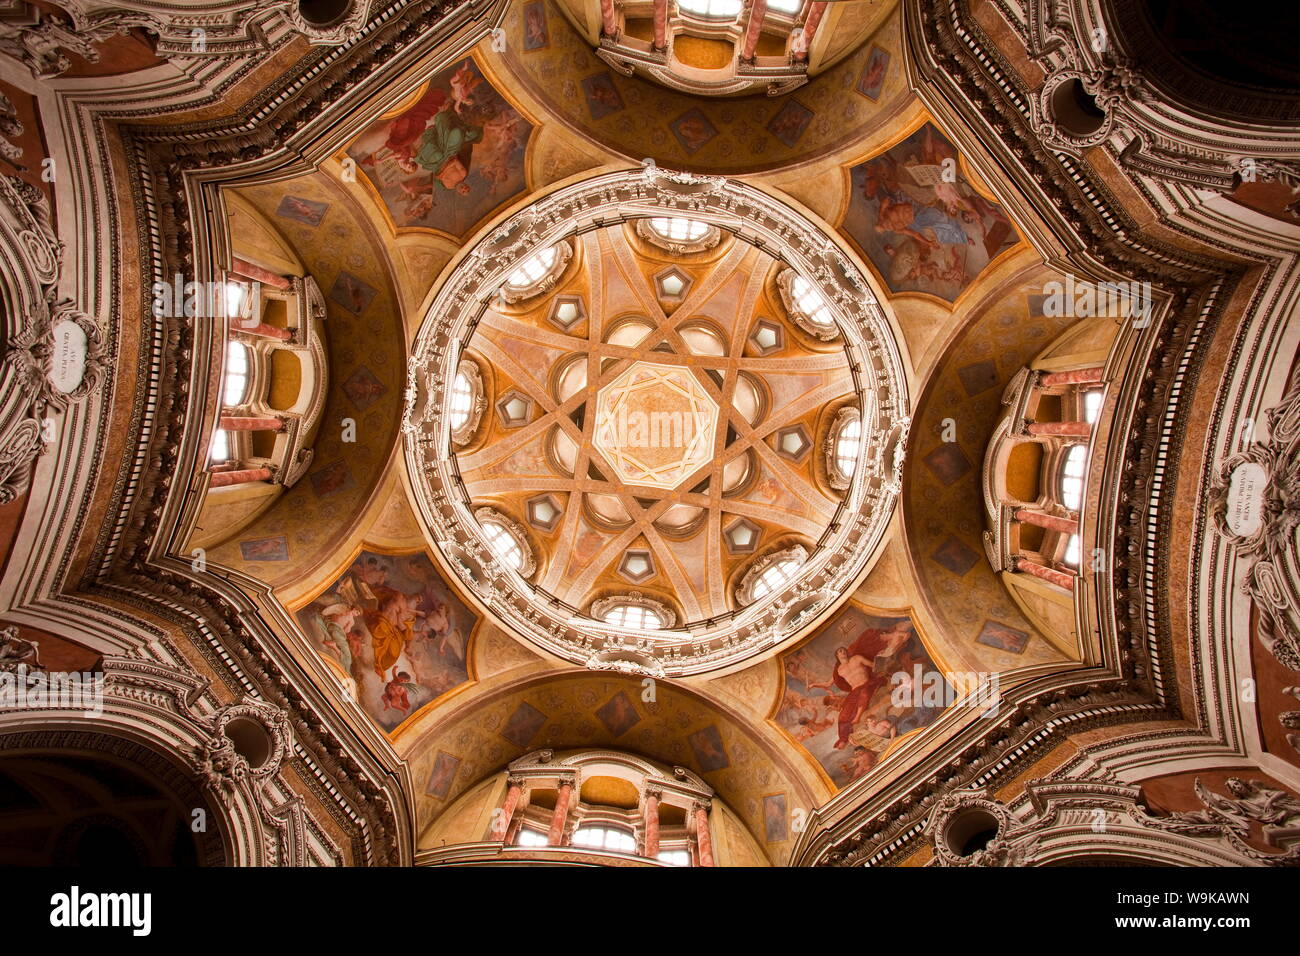 The complex geometrical baroque ceiling of San Lorenzo church, designed by the architect Guarino Guarini in the 17th century, Turin, Piedmont, Italy Stock Photo